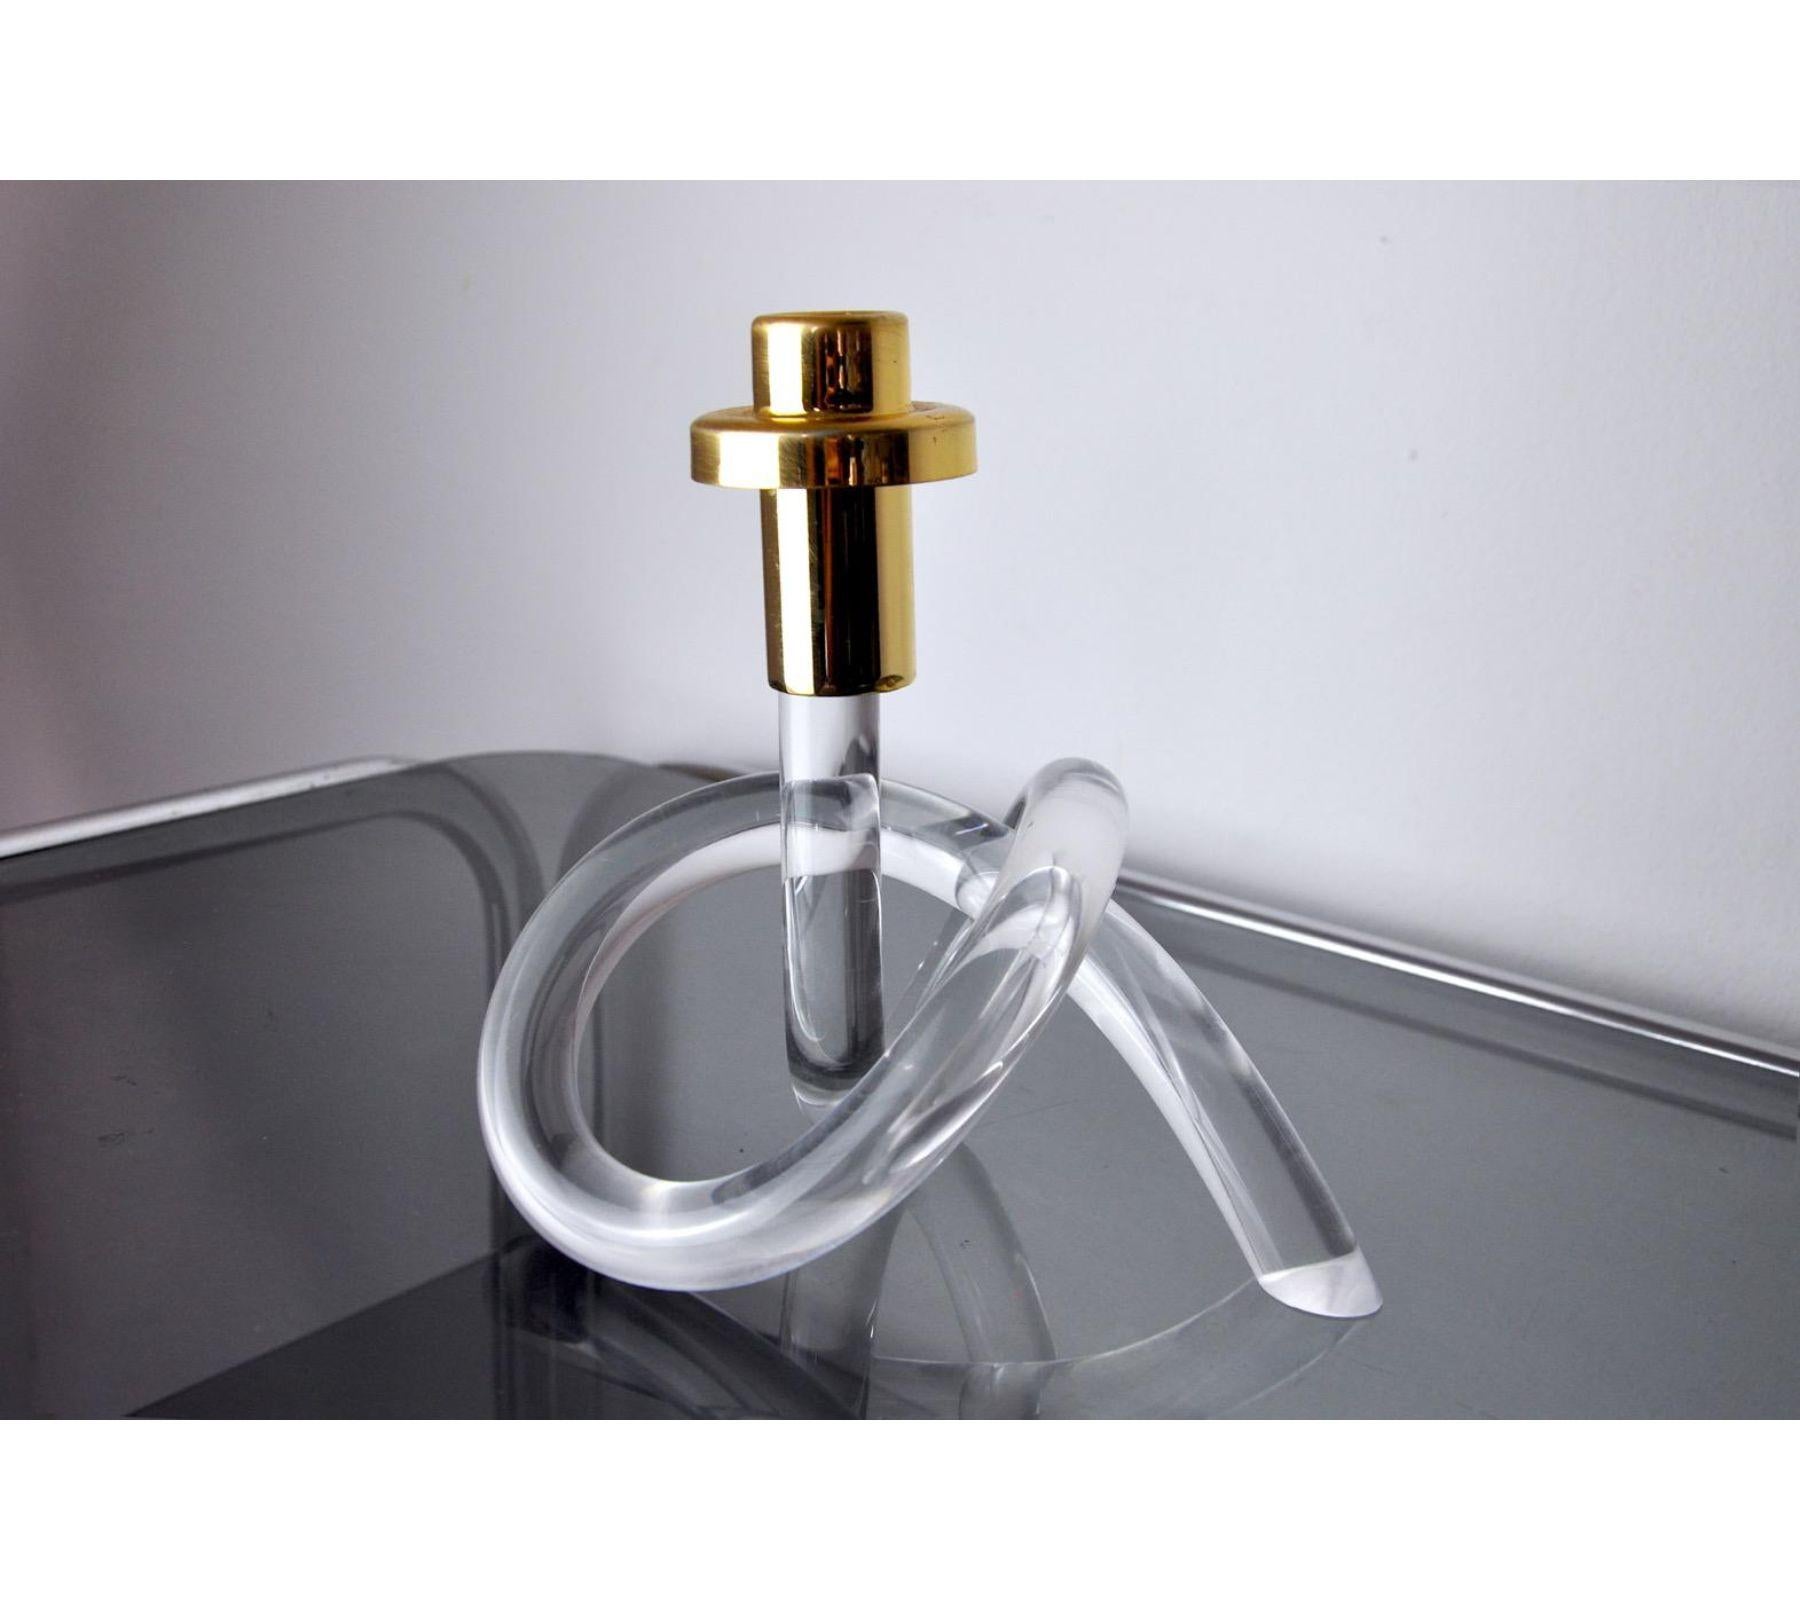 1970s lucite candle holder with golden brass support in the shape of a pretzel designed by elaine bscheider for dorothy thorpe. Superb design and vintage object to decorate your interior. 
 